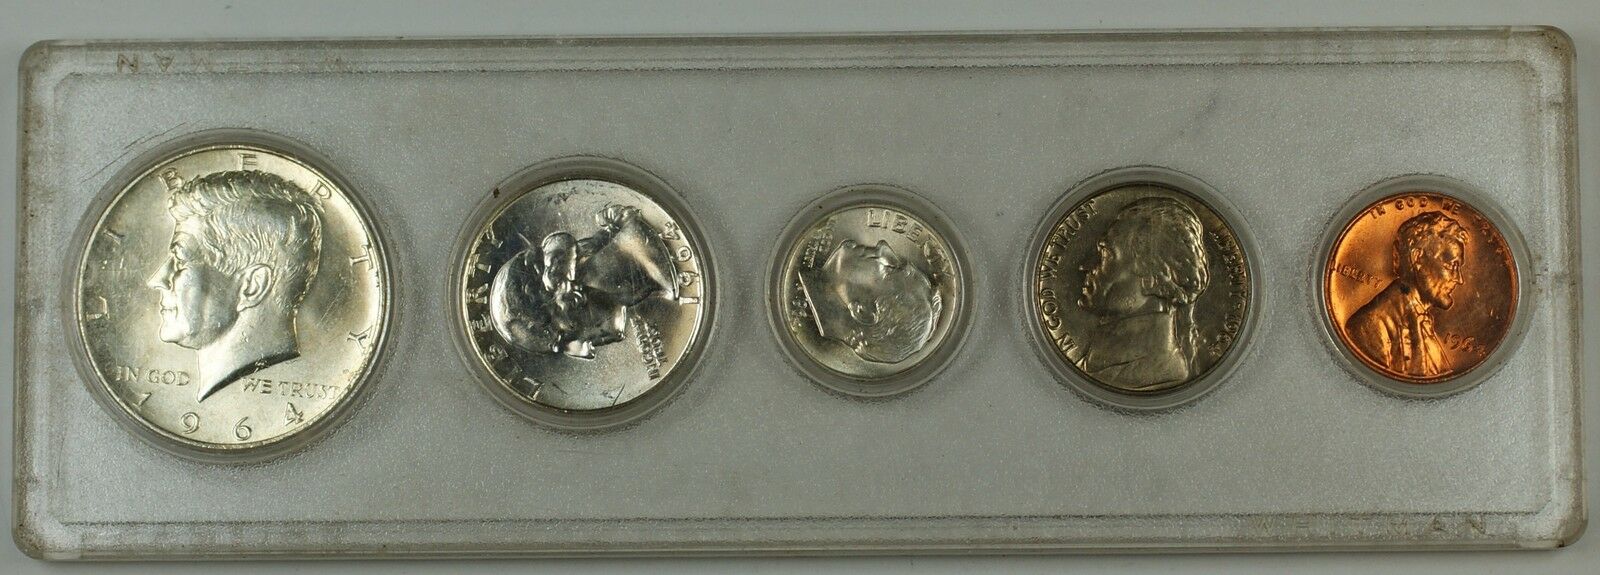 1964 Uncirculated Year Set with Silver Half, Quarter, and Dime, 5 Coins Total